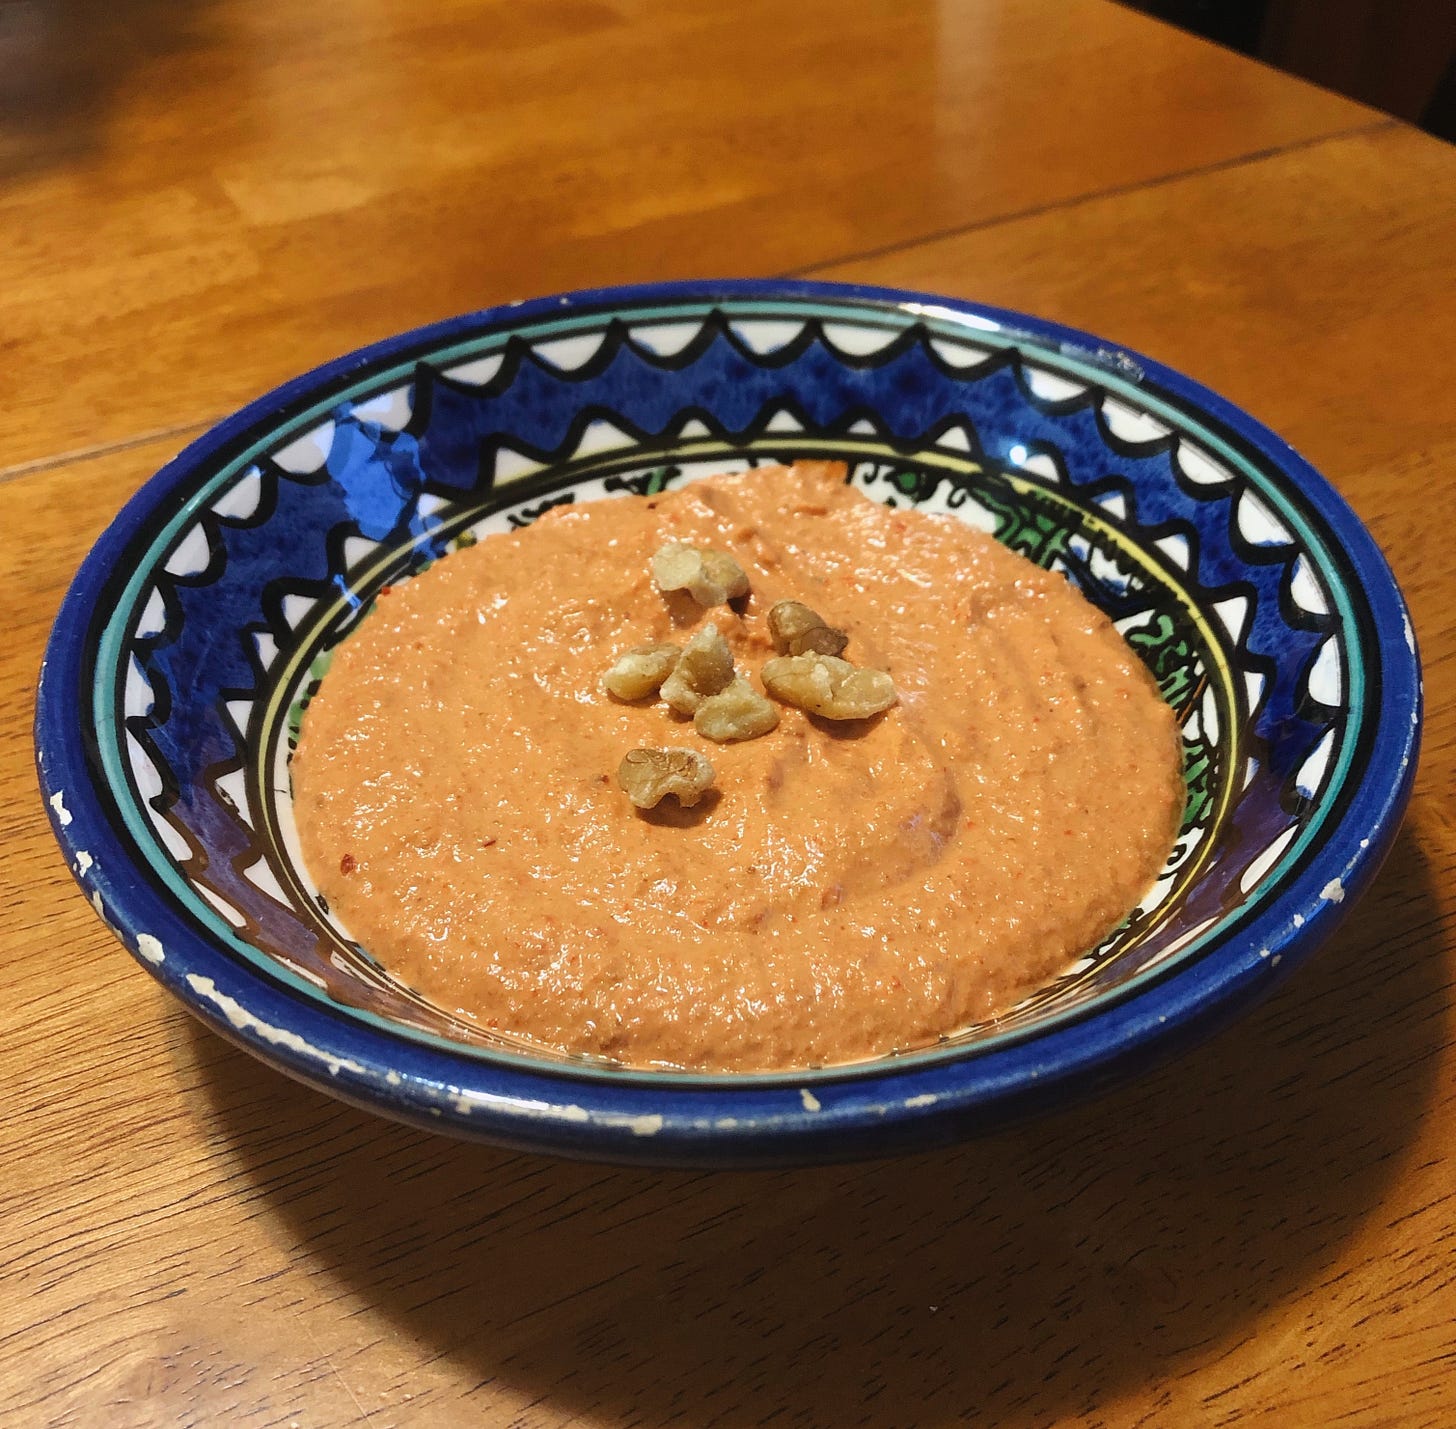 a light orange dip with hummus-like texture in a decorated ceramic bowl painted with blue designs. the dip is topped with chopped walnuts and the bowl is sitting on a table.